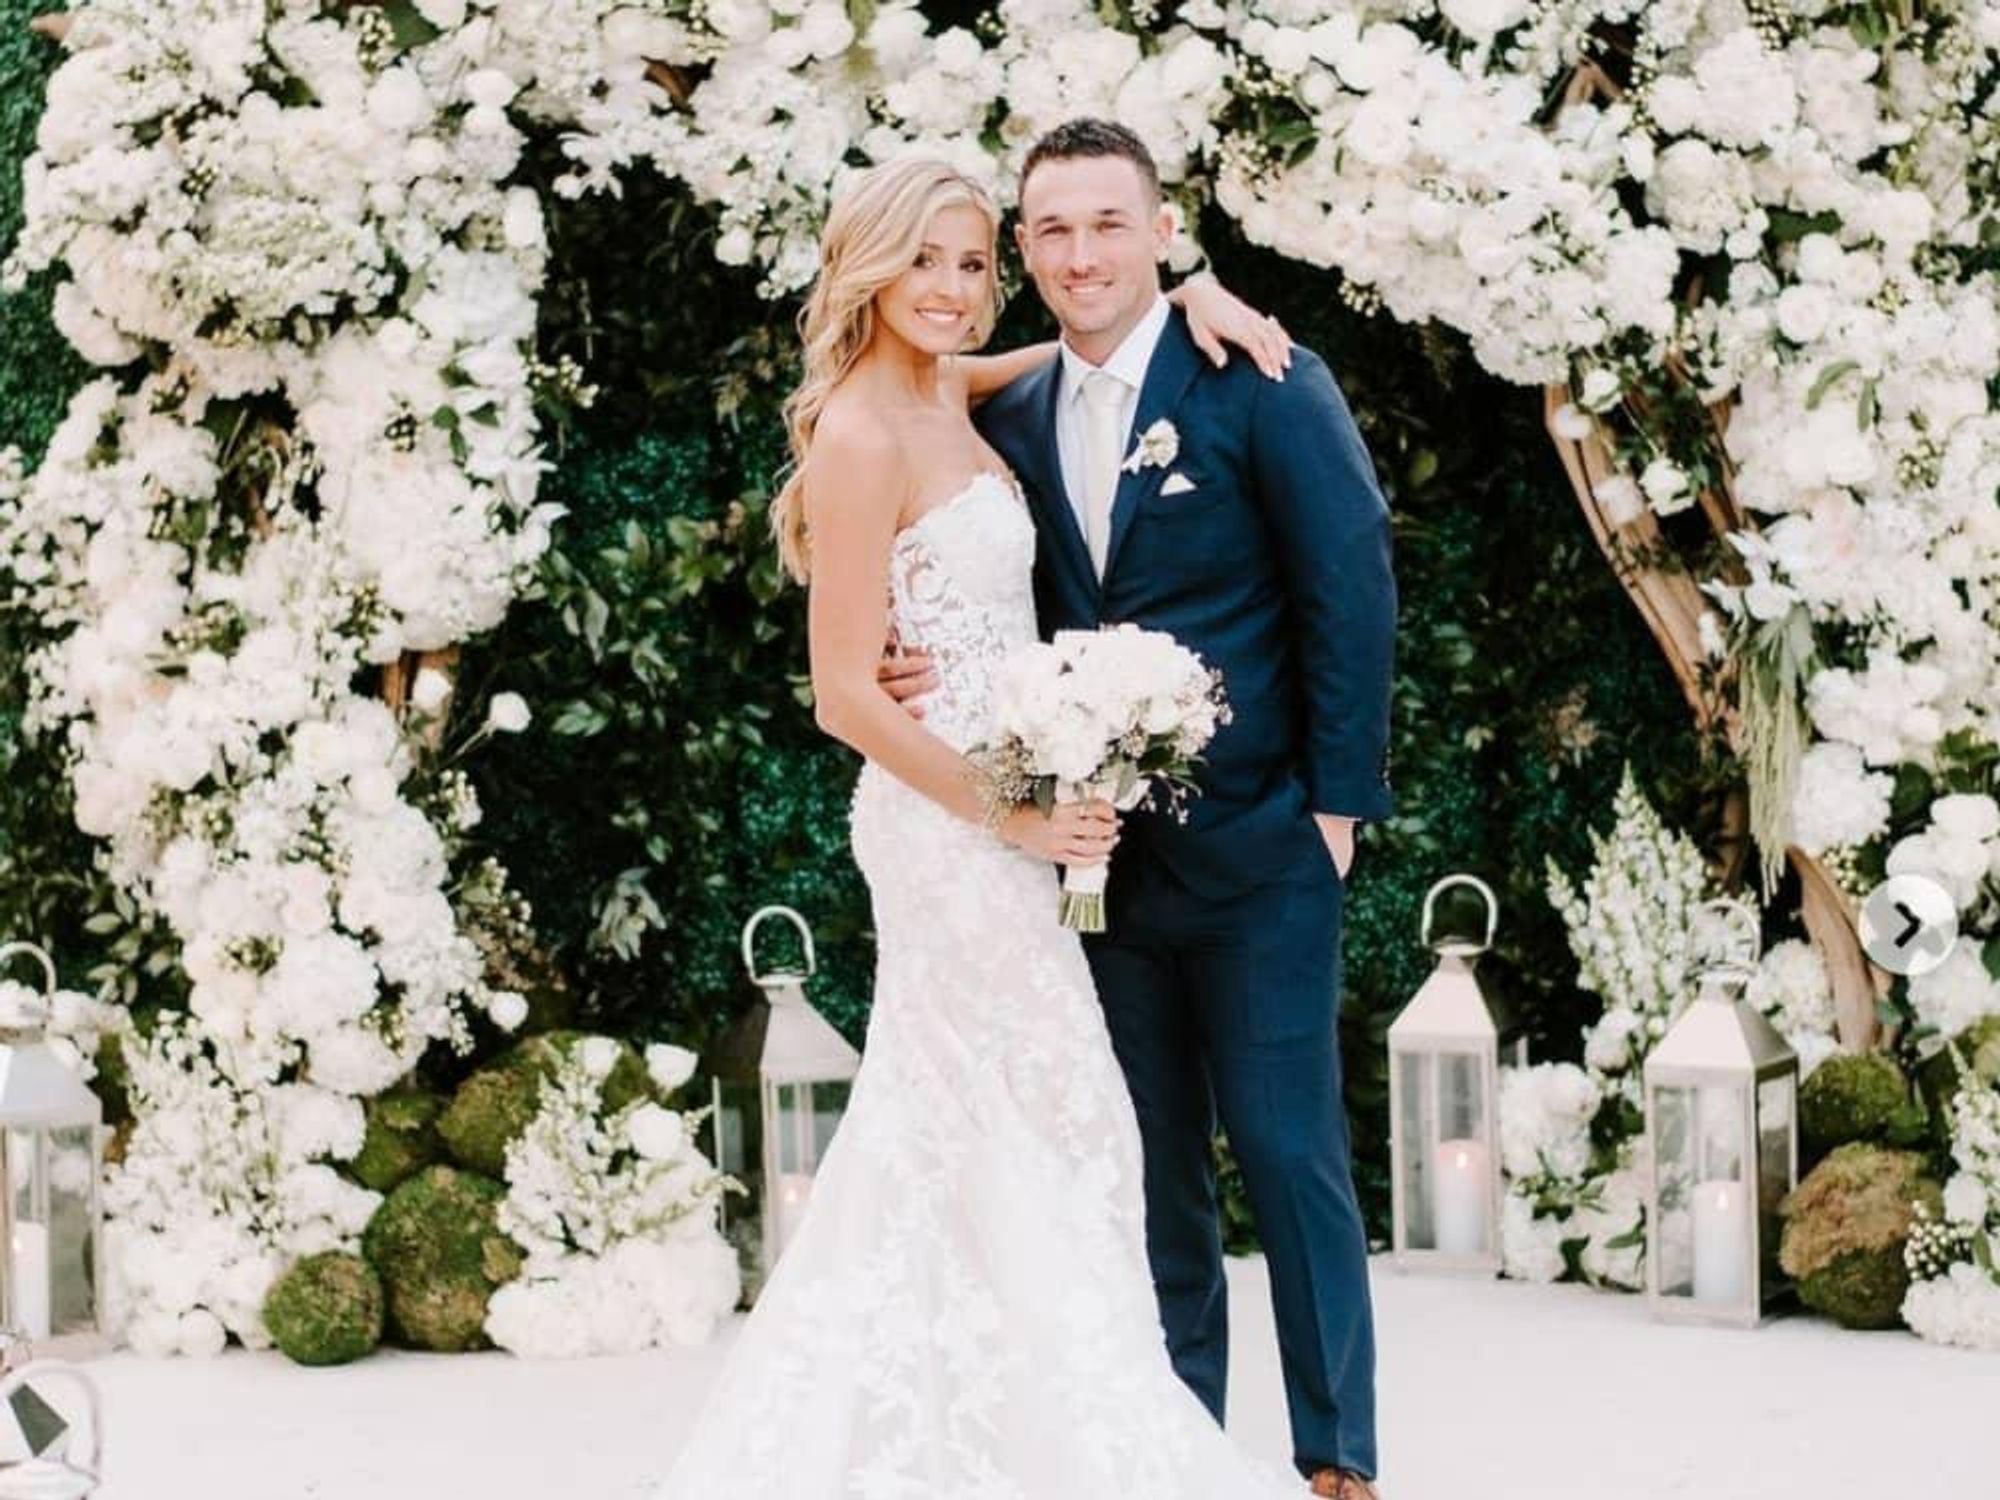 Who Is Alex Bregman’s Wife? Know All About Reagan Howard